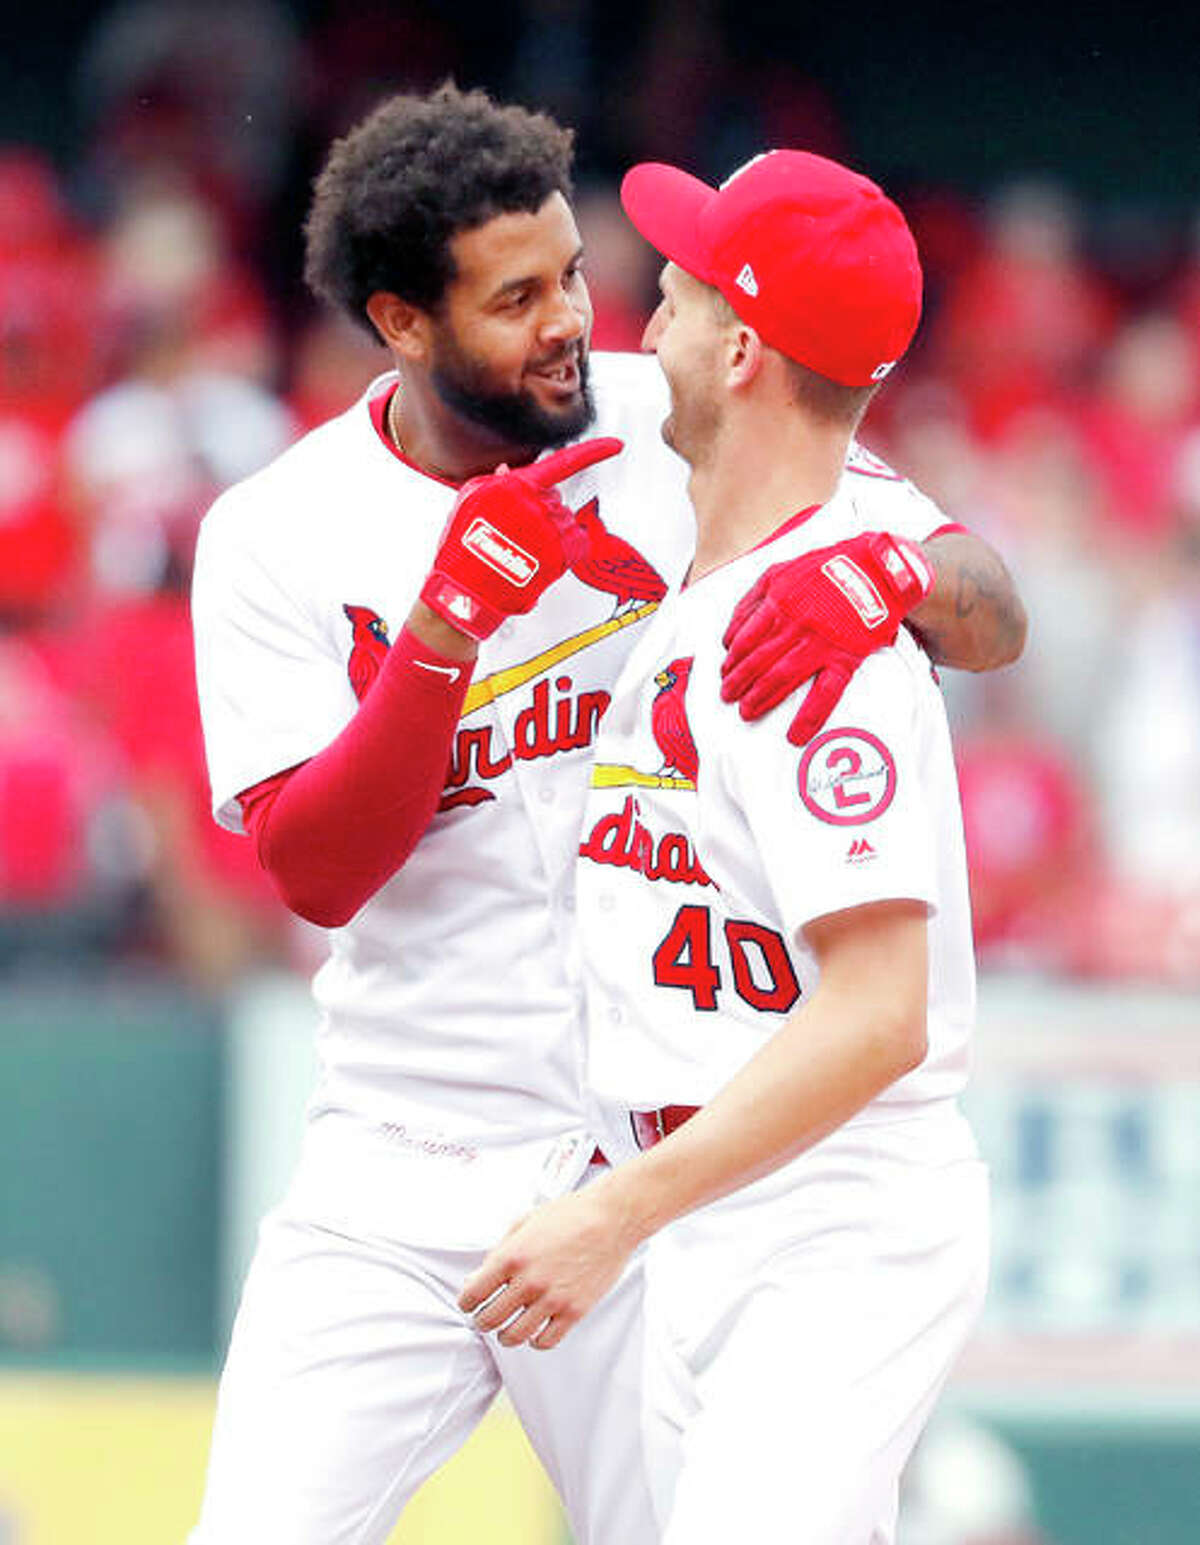 The Cardinals’ Jose Martinez, left, celebrates with teammate Chasen Shreve after hitting an RBI walkoff single to defeat the Colorado Rockies 3-2 Thursday at Busch Stadium.